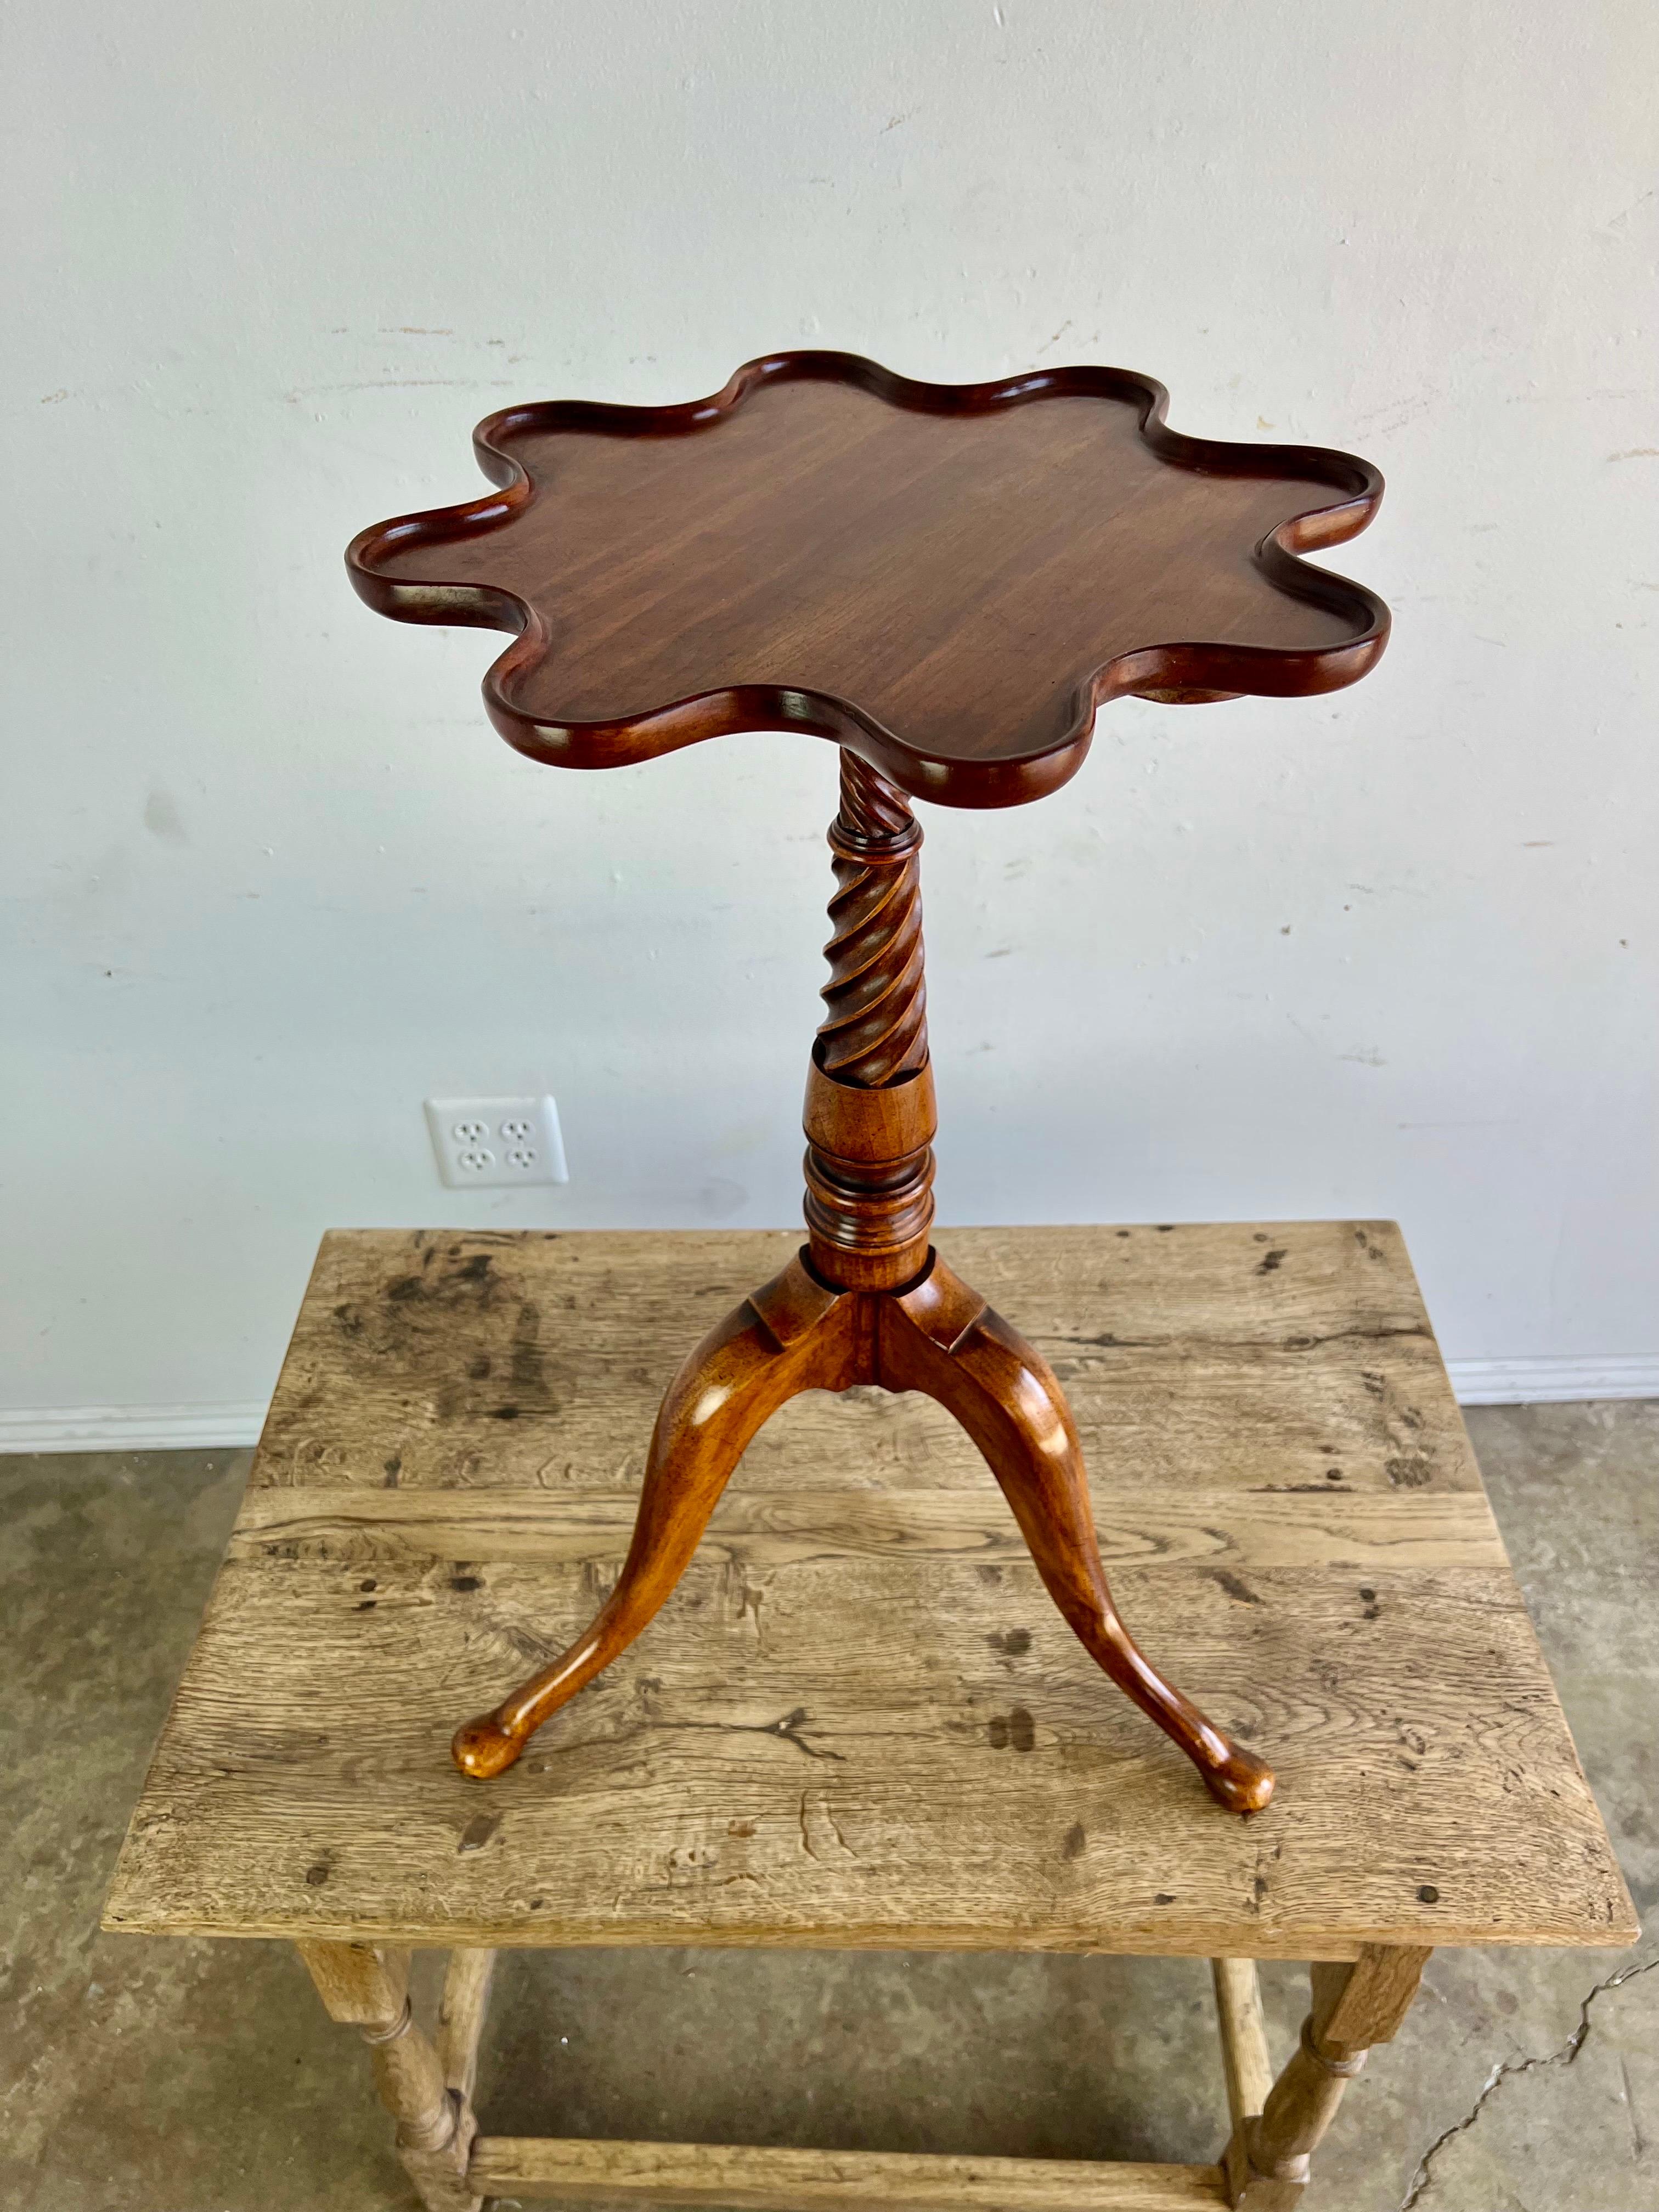 Petite Mahogany English tripod table with a twisted body and scalloped top.